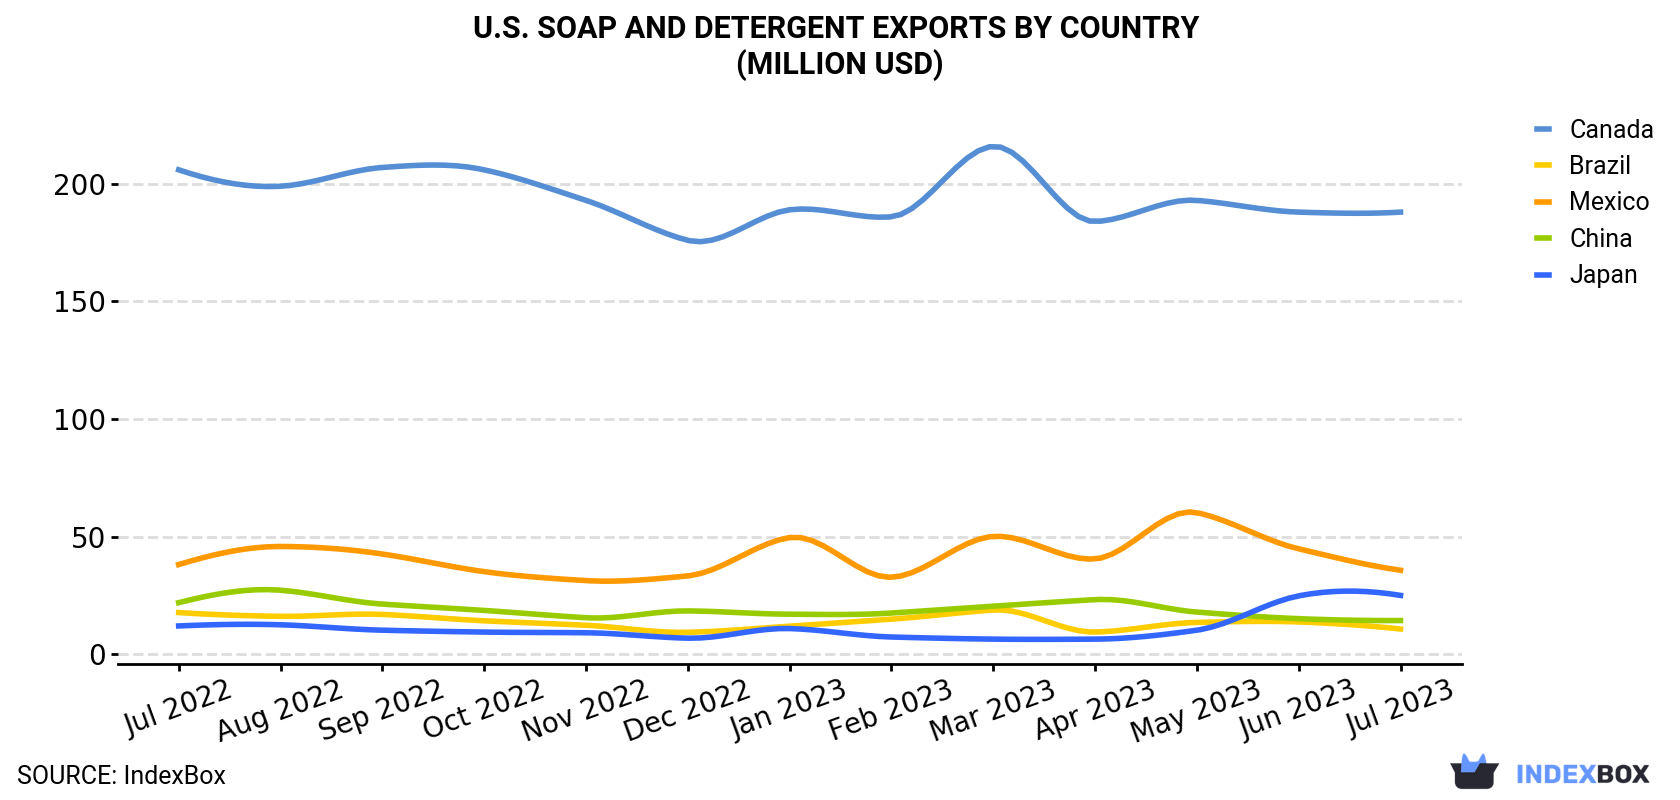 U.S. Soap And Detergent Exports By Country (Million USD)